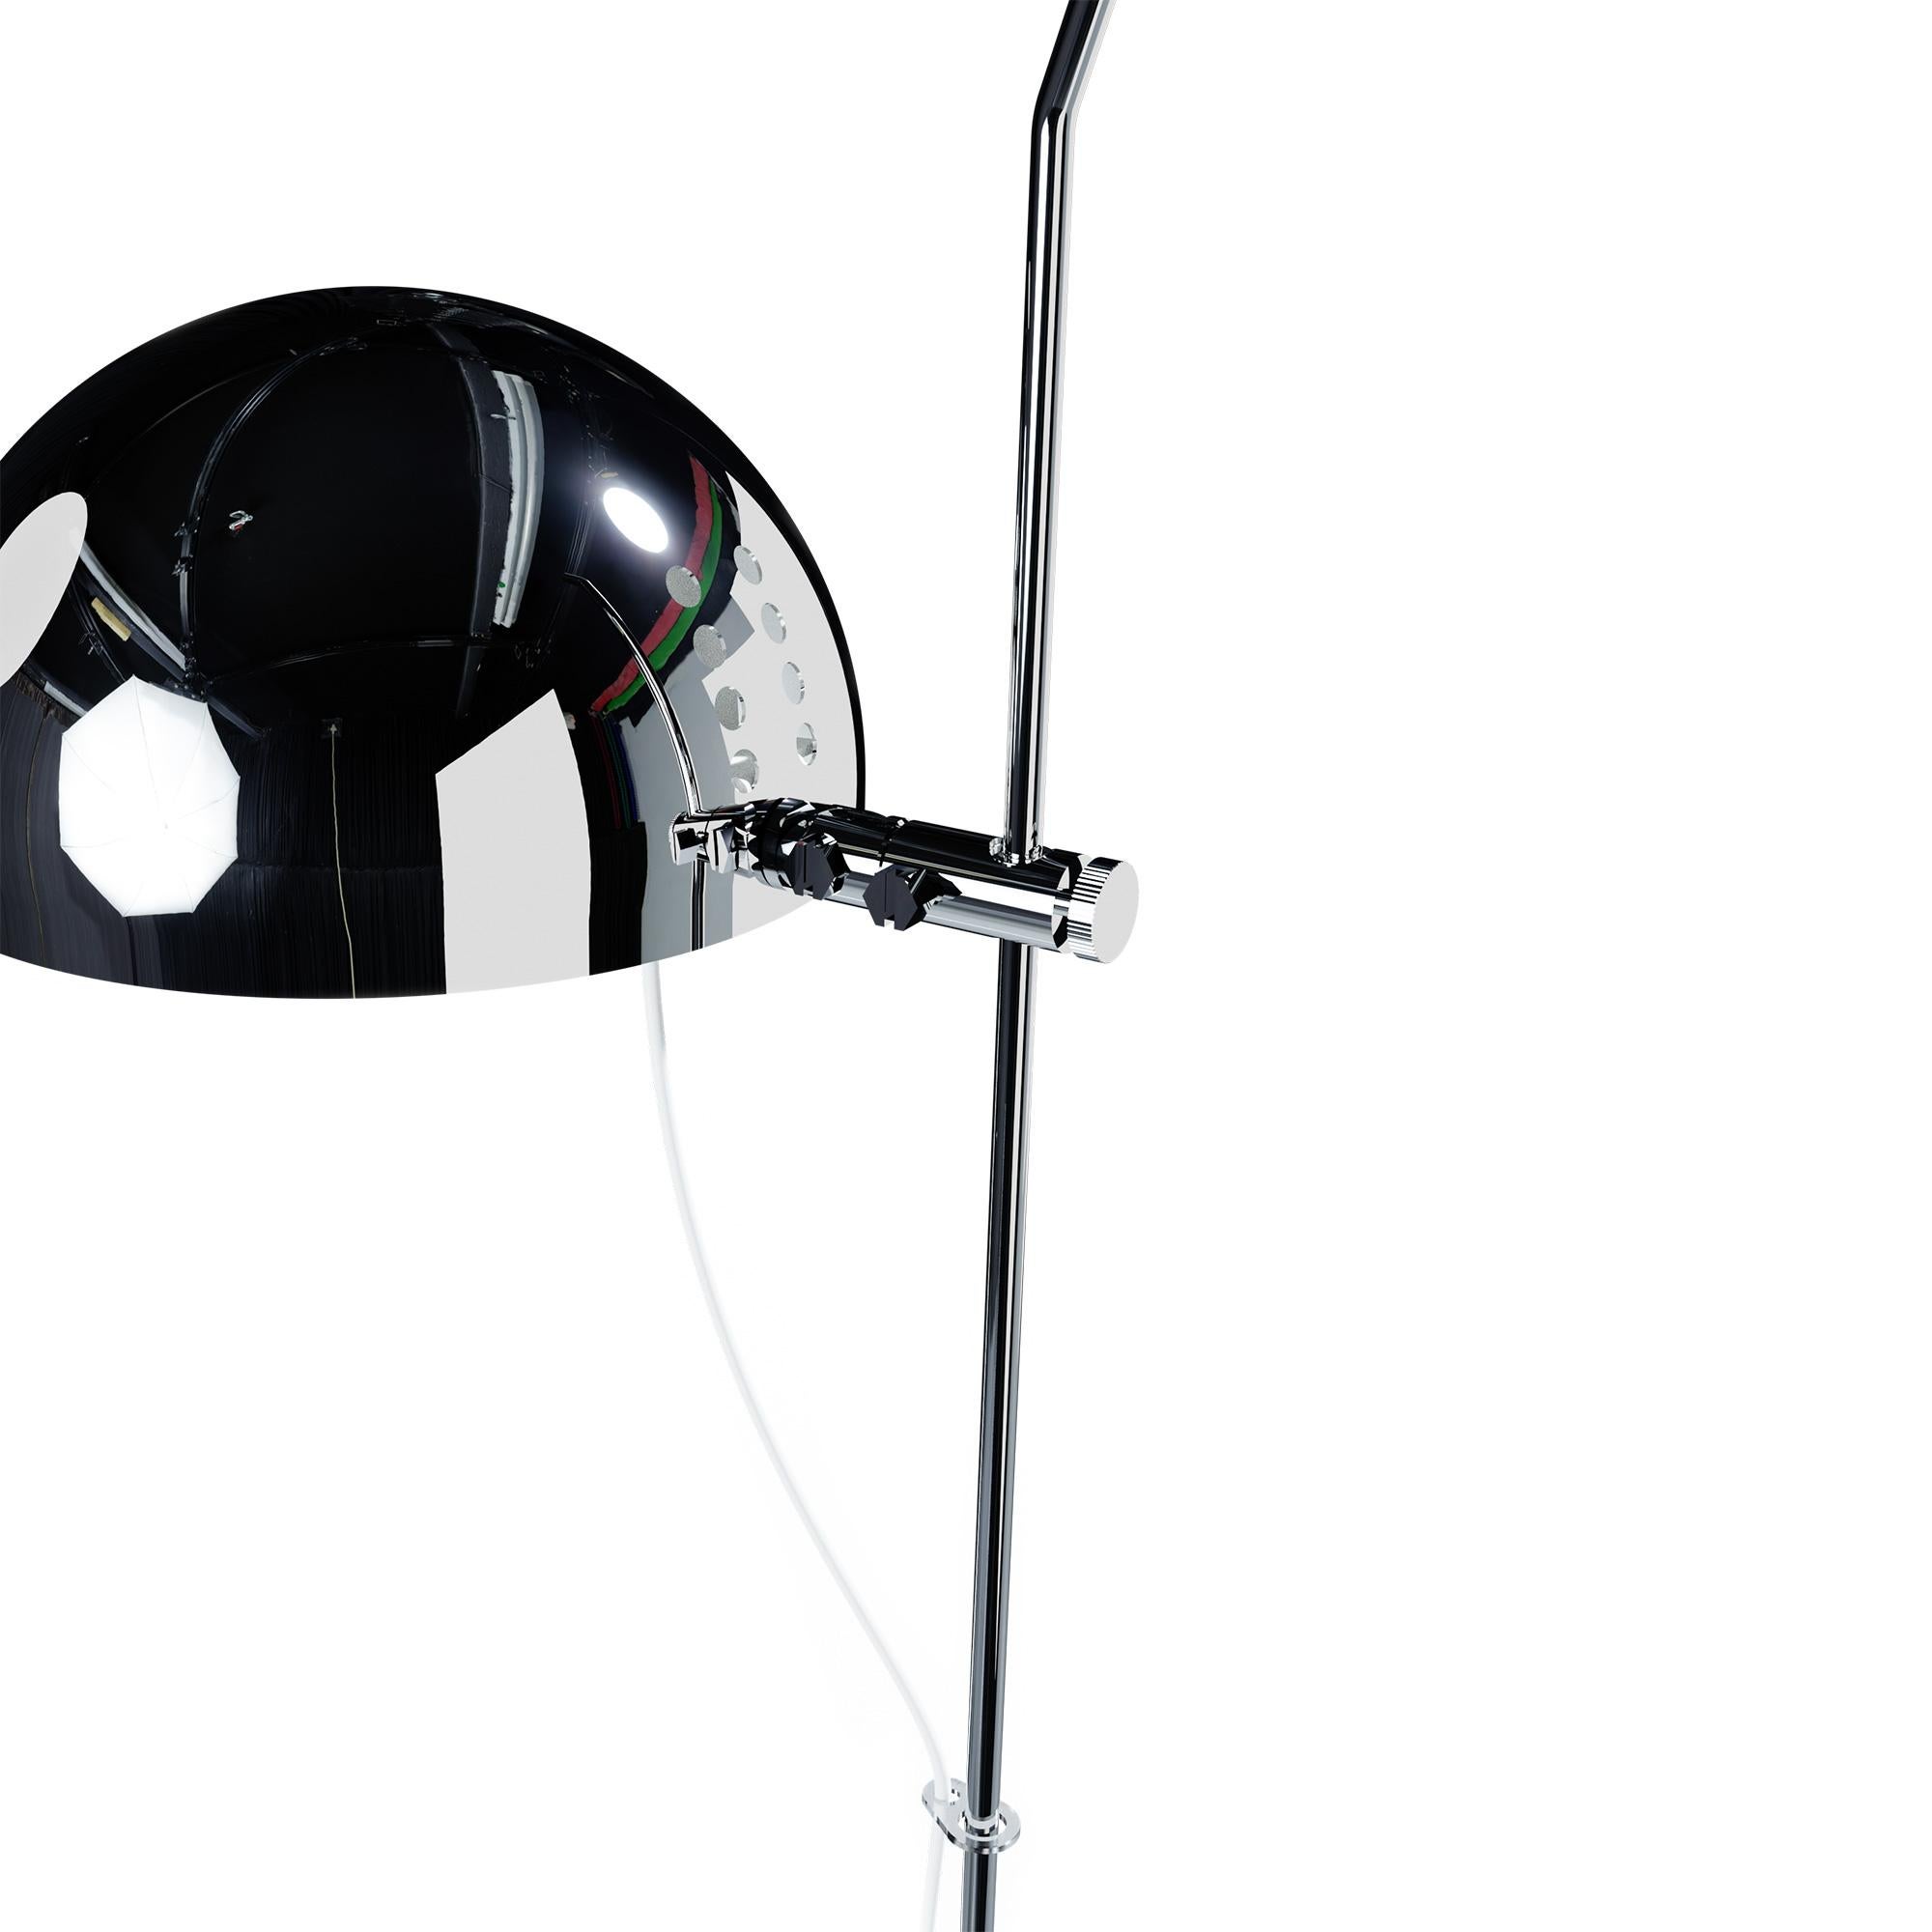 Chrome A21 Table Lamp by Disderot
Limited Edition. 
Designed by Alain Richard
Dimensions: Ø 40 x H 62 cm.
Materials: Lacquered metal and chrome.

Delivered with authentication certificate. Made in France. Available in different colored metal